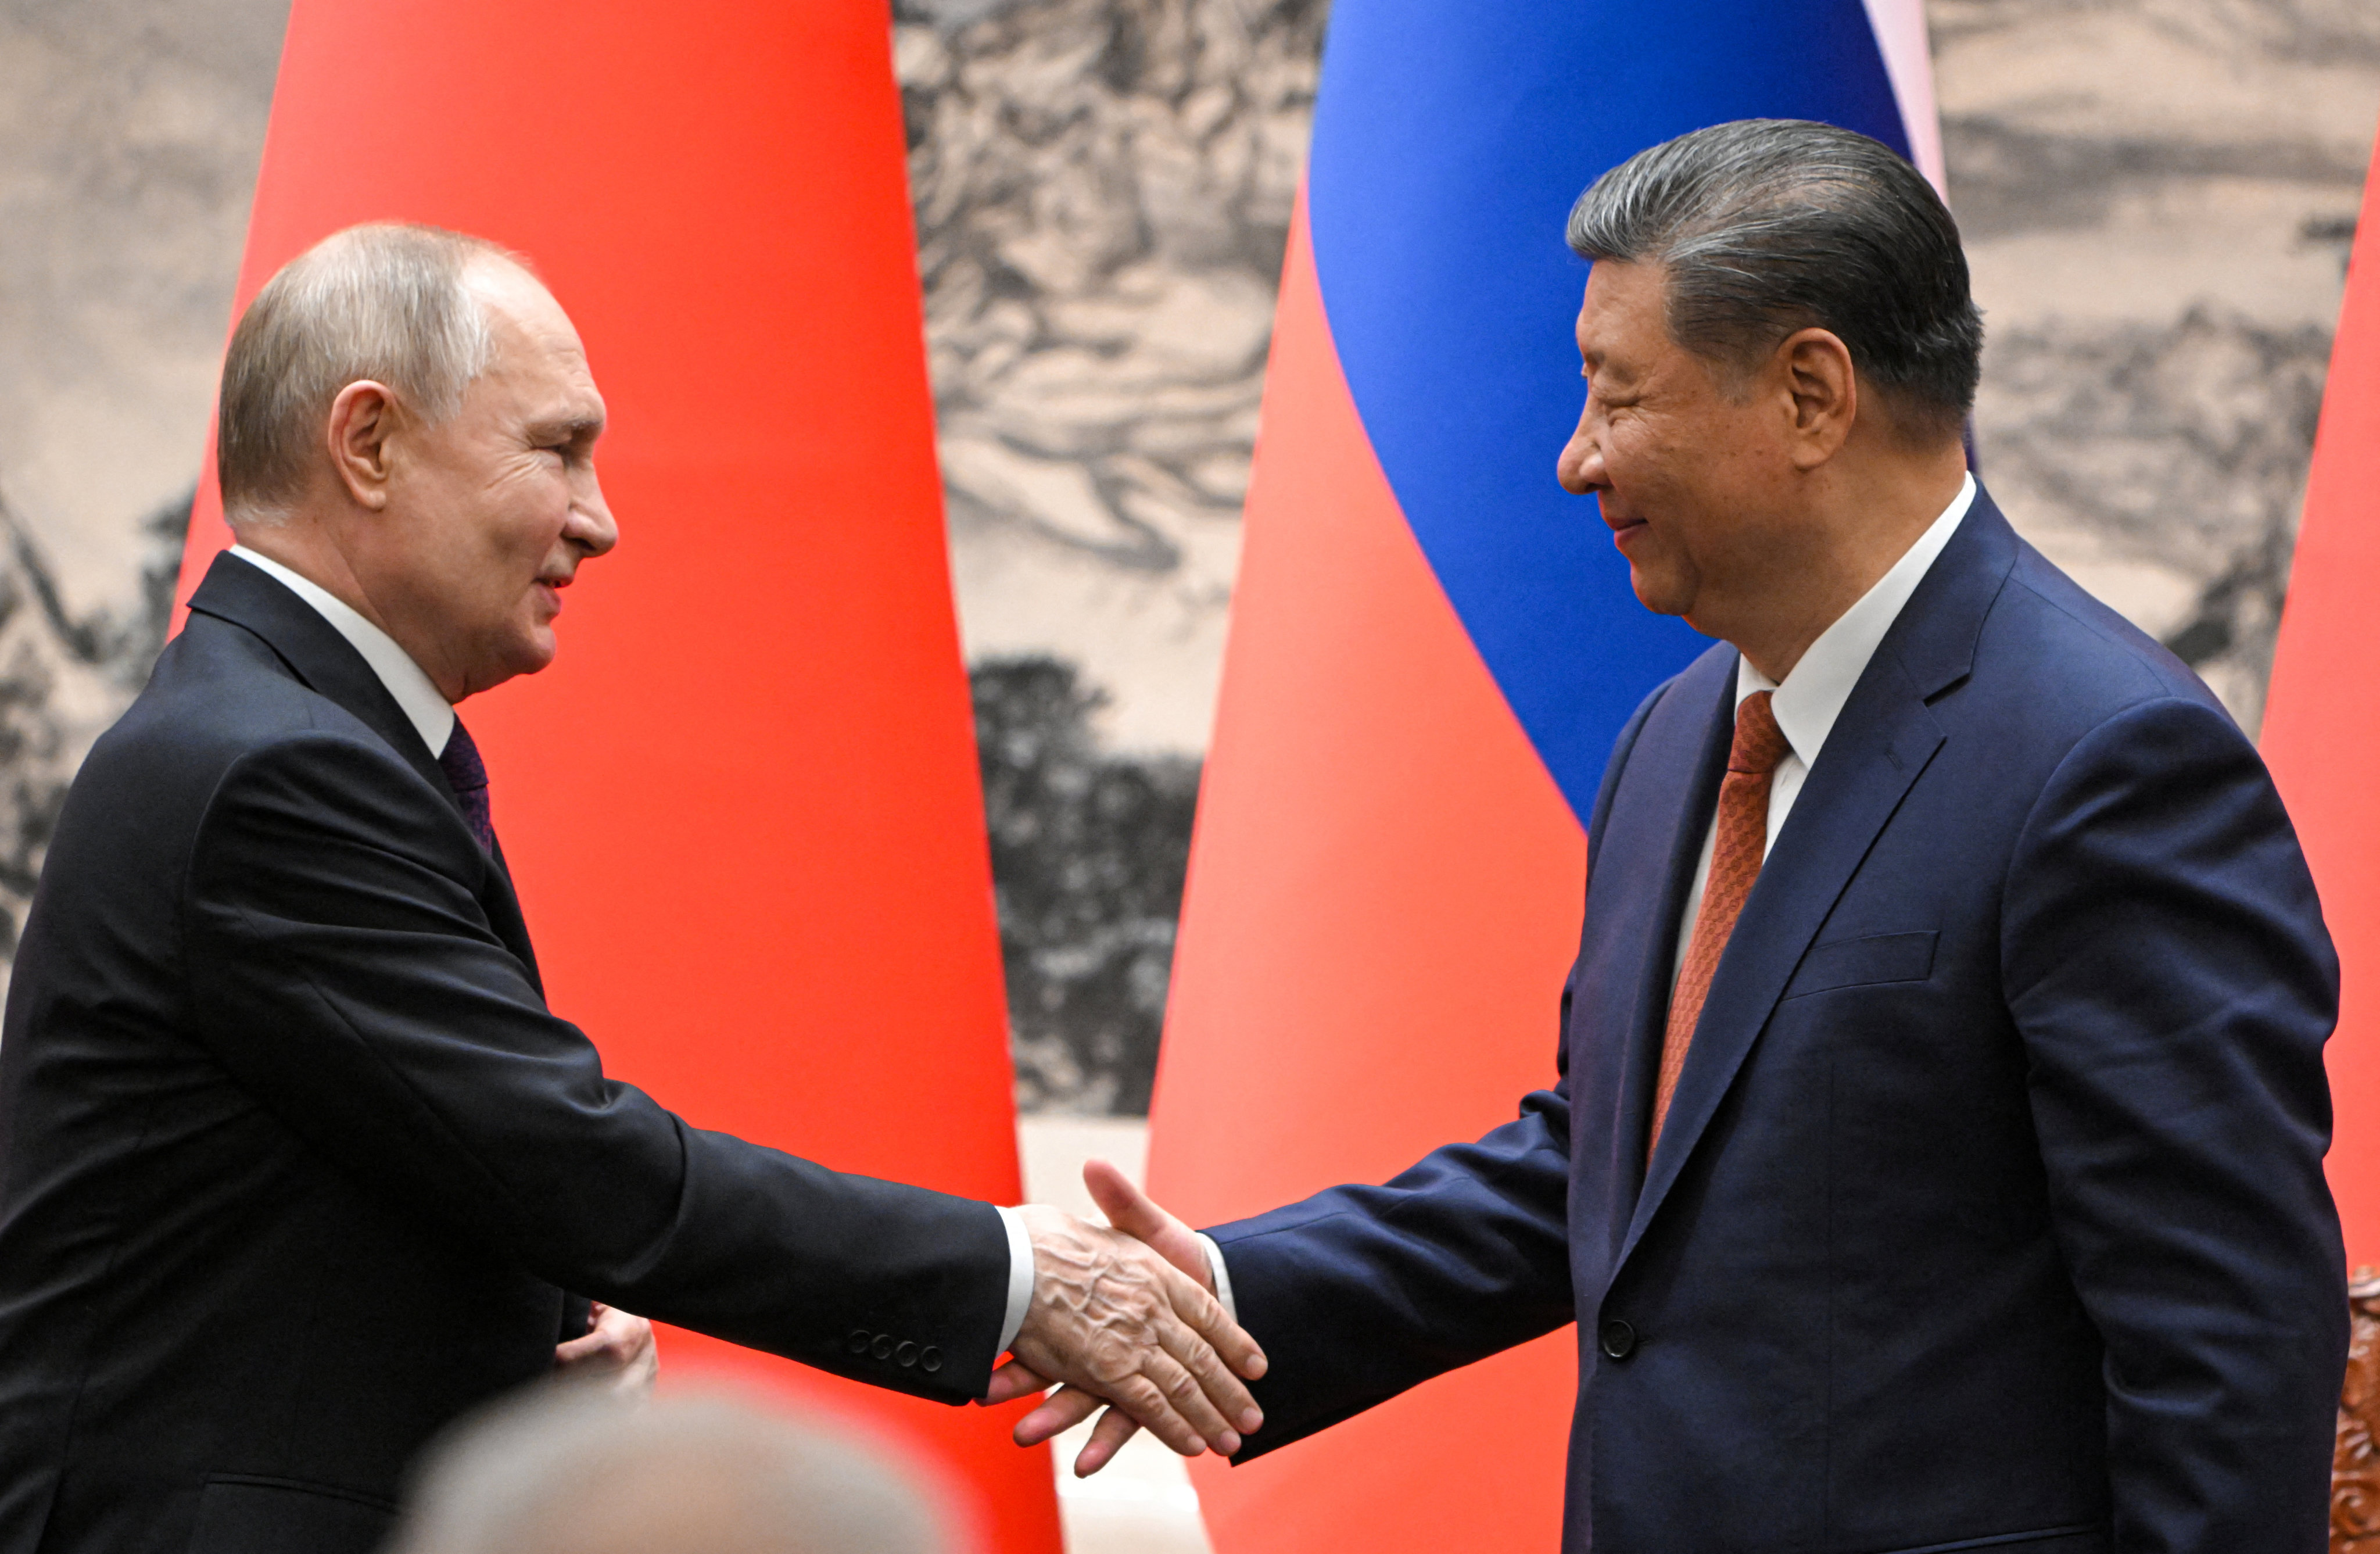 Russian President Vladimir Putin shakes hands with Chinese President Xi Jinping during a meeting in Beijing on Thursday. Photo: Reuters